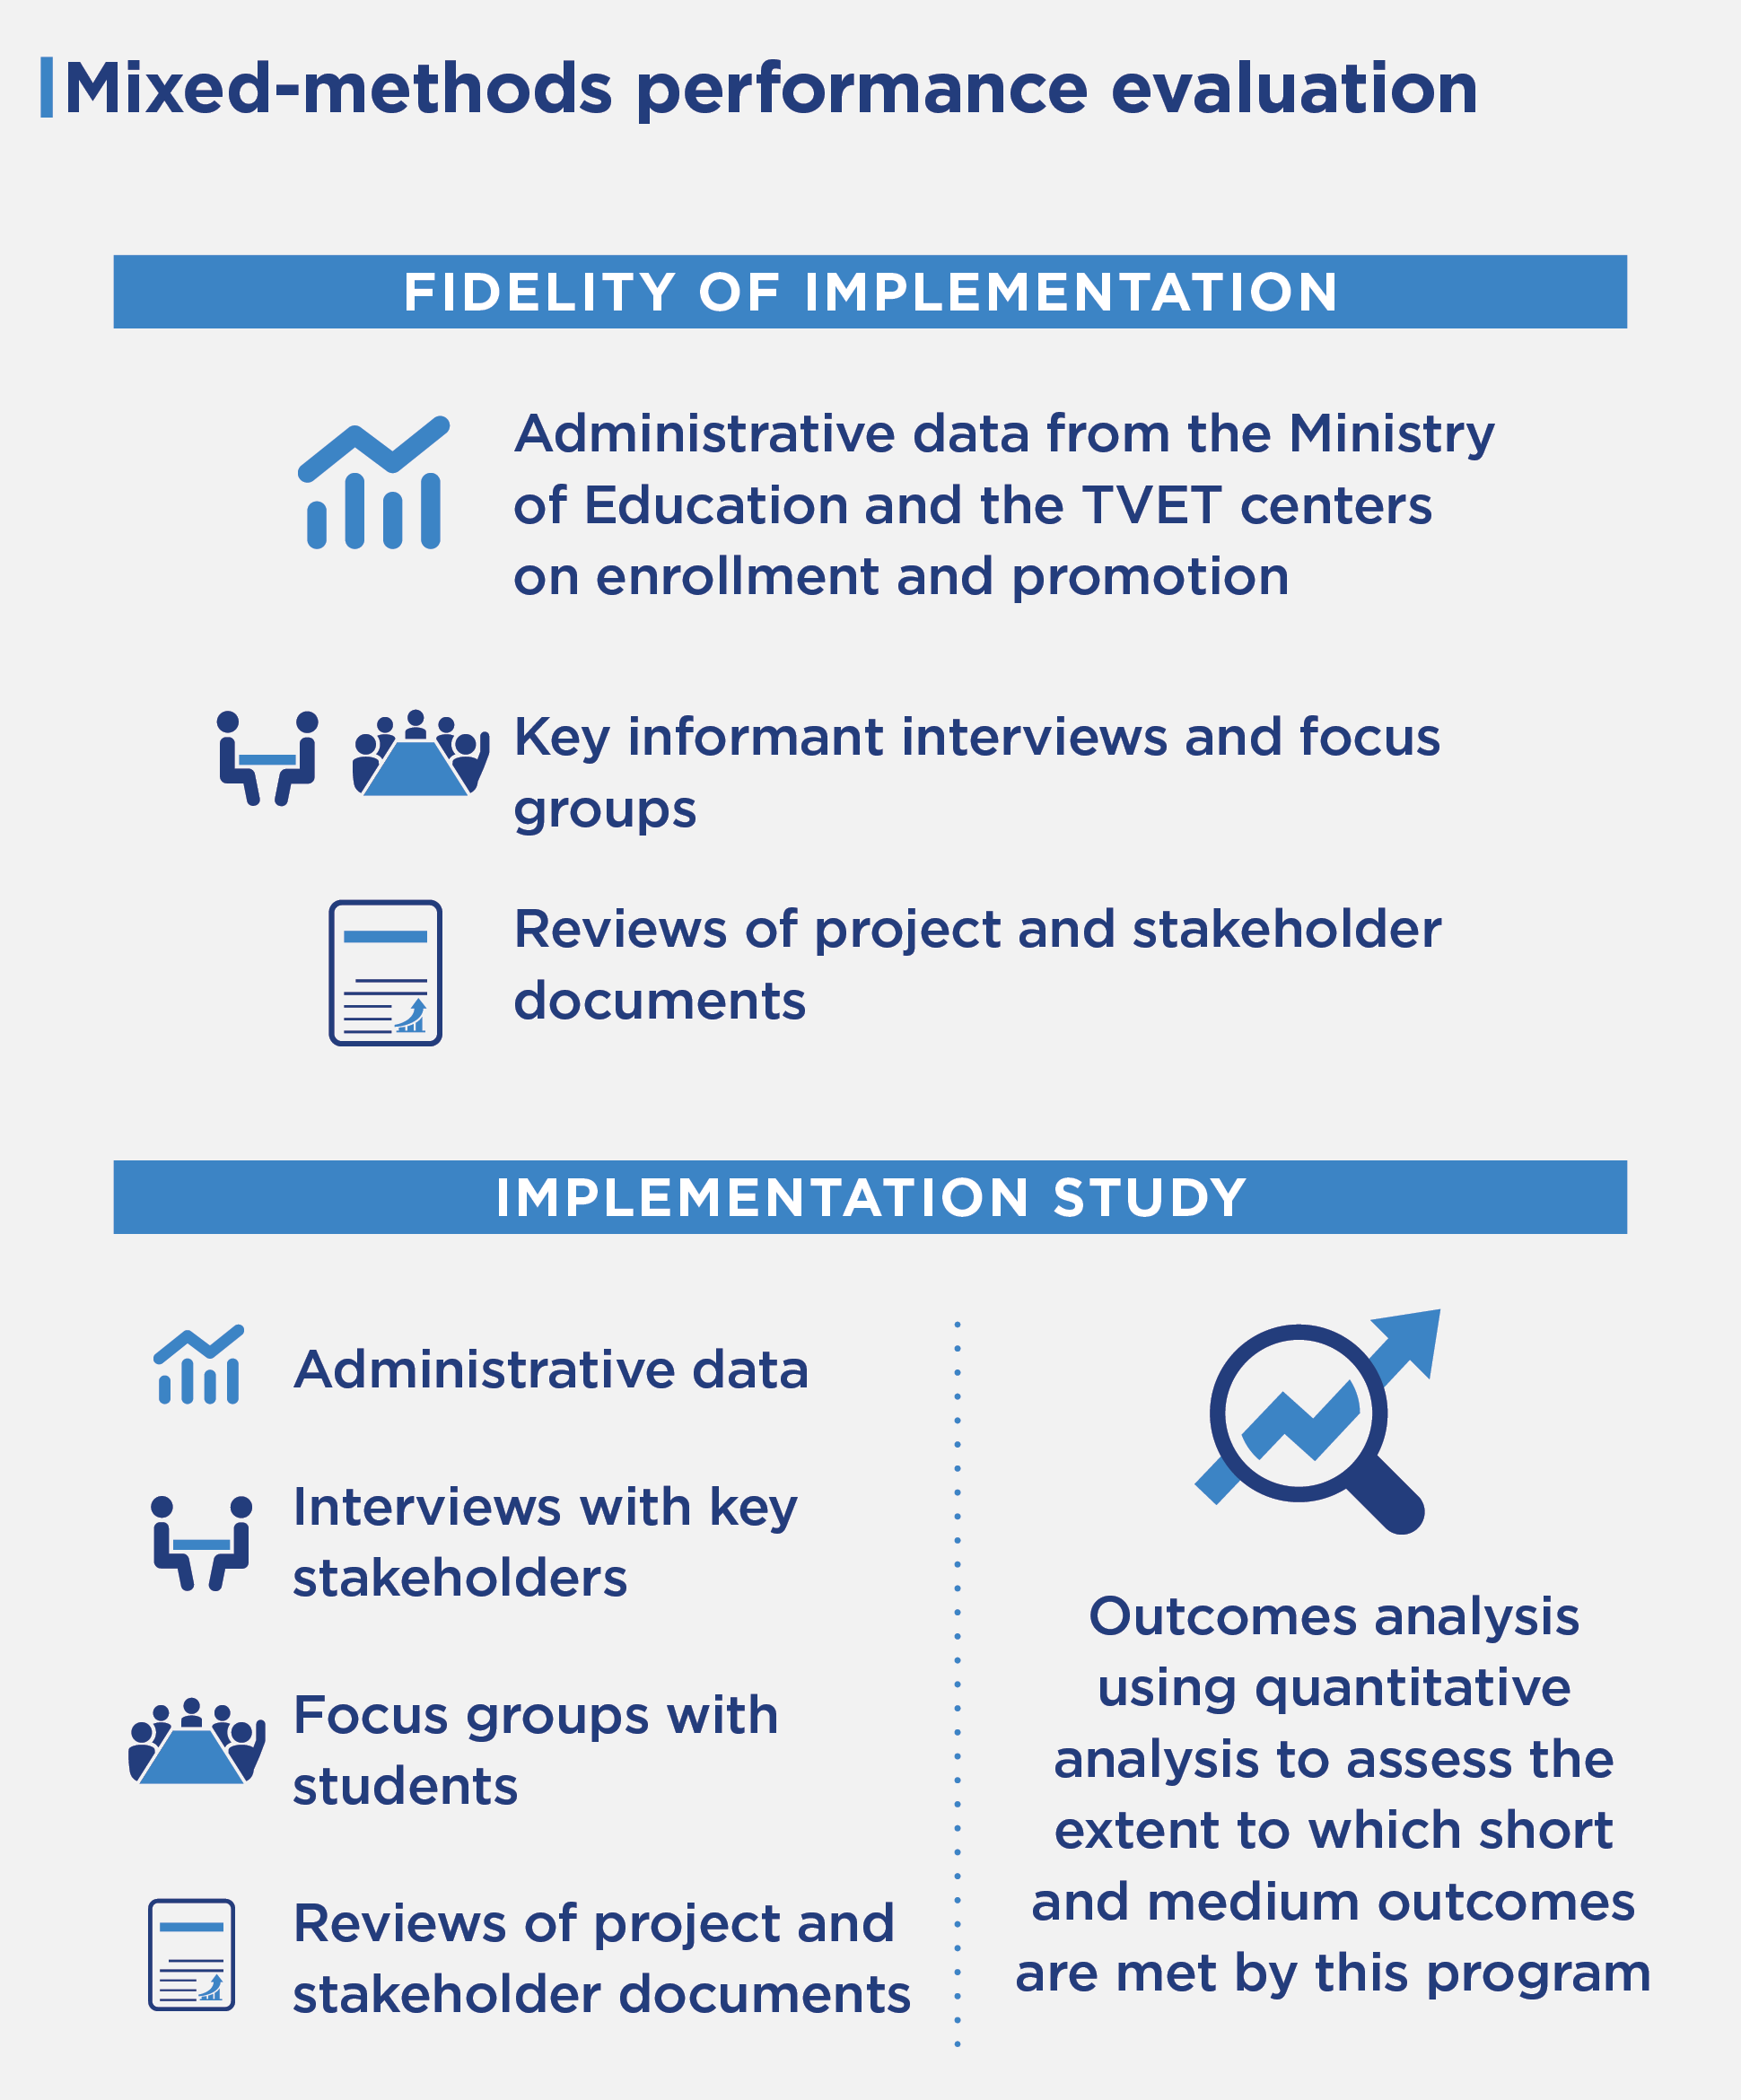 The fidelity of implementation evaluation used administrative data from the Ministry of Education and the TVET center on enrollment and promotion. It used KIIs and focus groups, as well as reviews of project and stakeholder documents. The implementation study used administrative data, interviews with key stakeholders, focus group discussions, and reviews of project stakeholder documents. In addition, there was an outcomes analysis using quantitative analysis to assess the extent to which short and medium outcomes are met by this program.